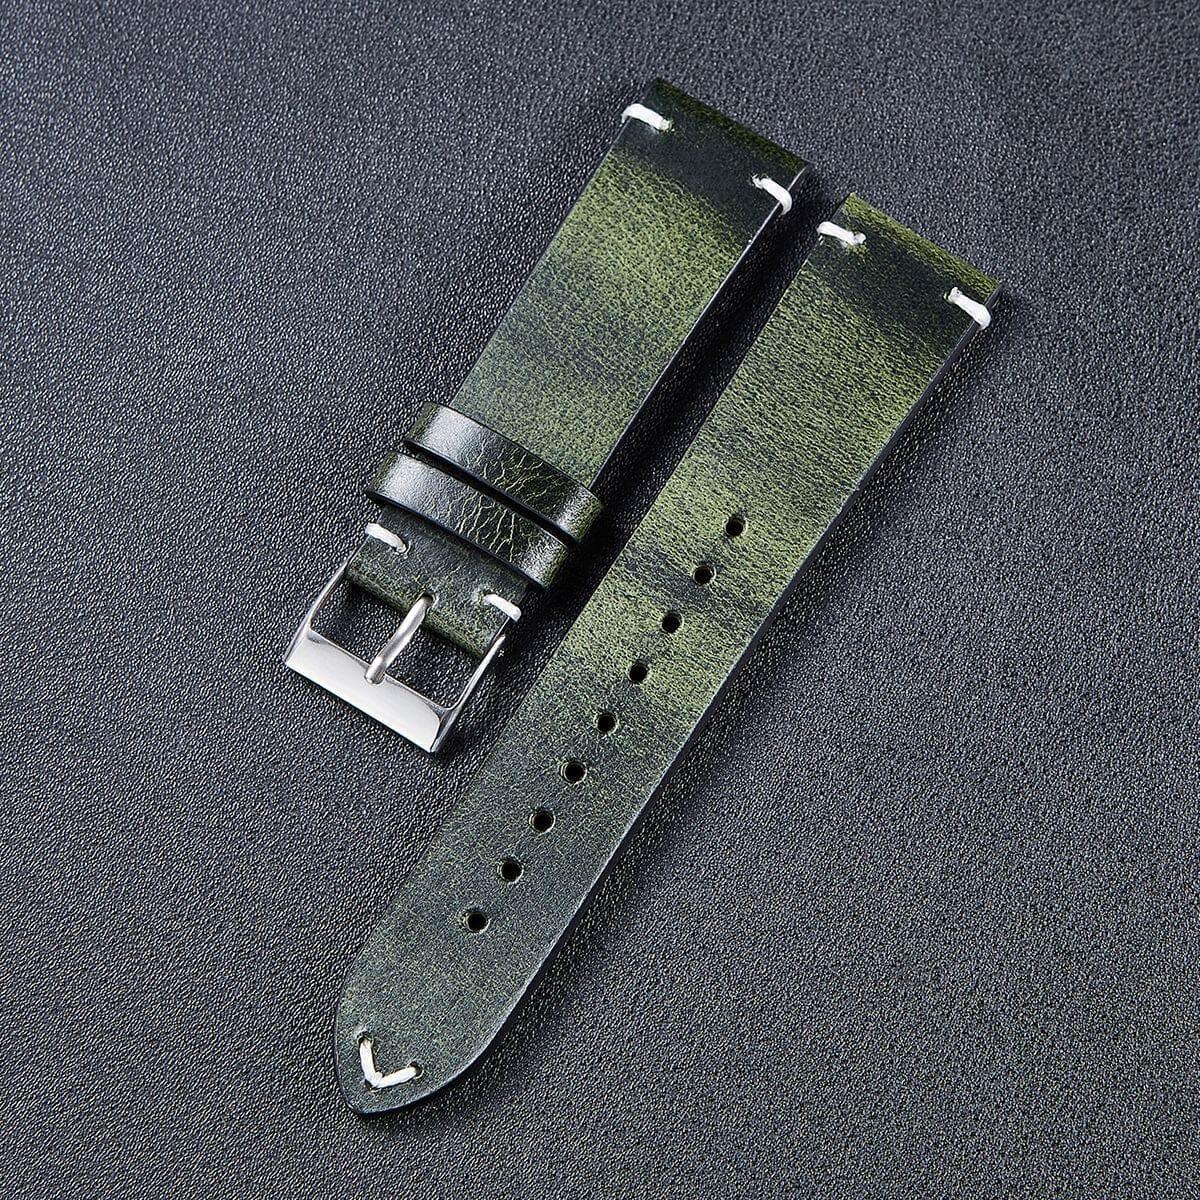 Vintage Oiled Leather Watch Straps Compatible with the Polar Vantage M